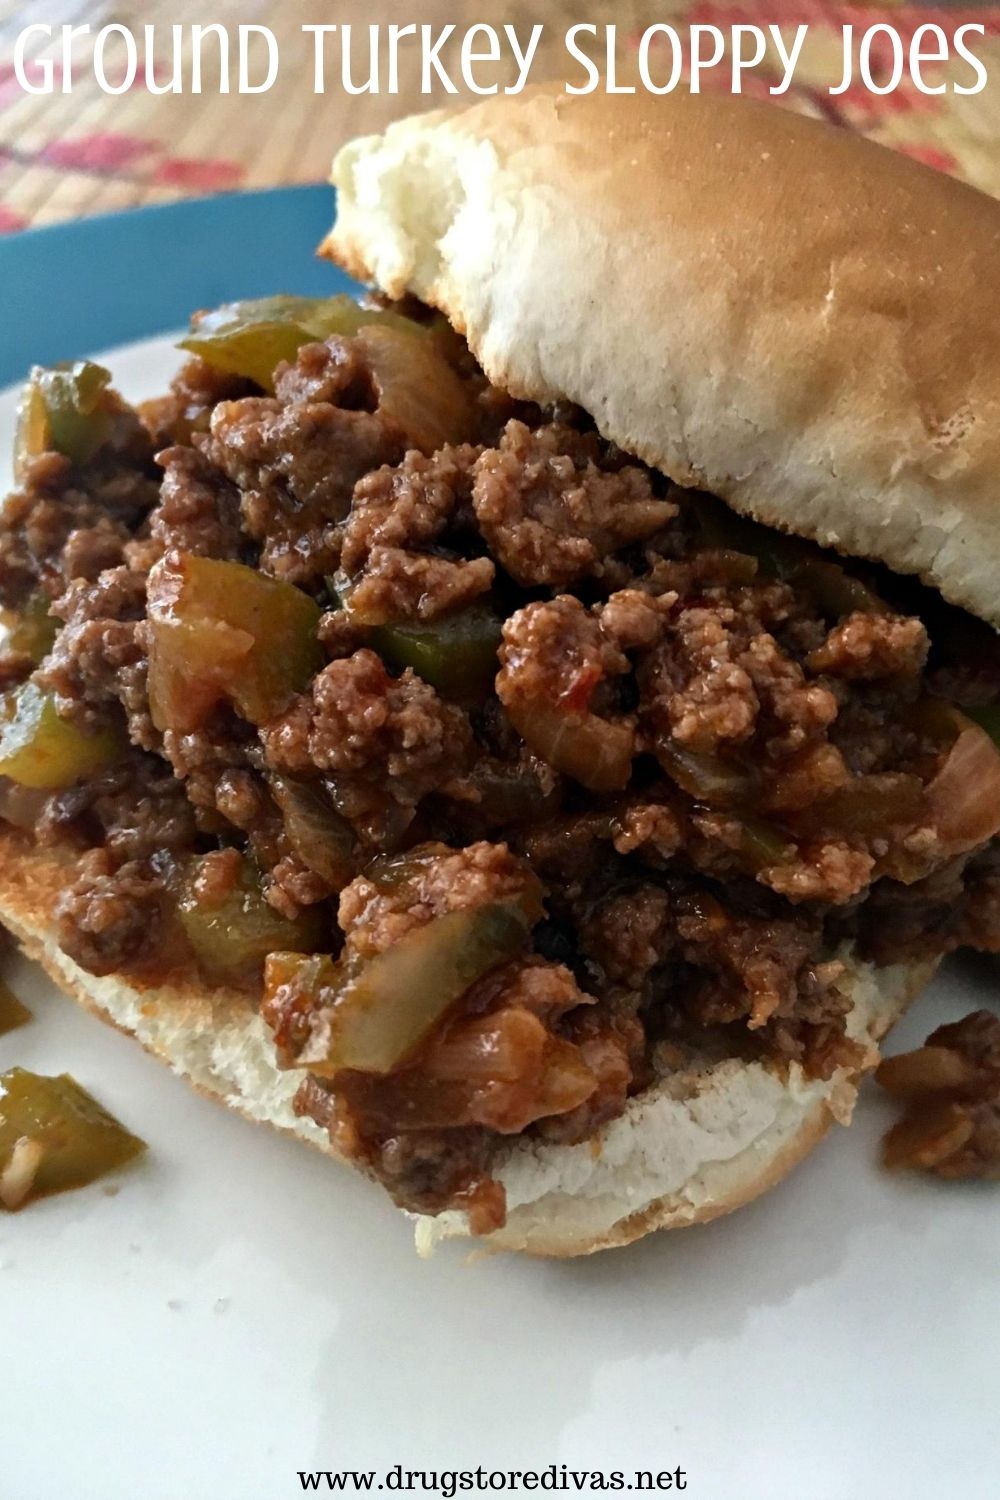 Ground Turkey Sloppy Joes are a great alternative to your favorite ground beef Sloppy Joes. Plus, after you make the sauce from scratch, you'll never buy a packet of mix again.